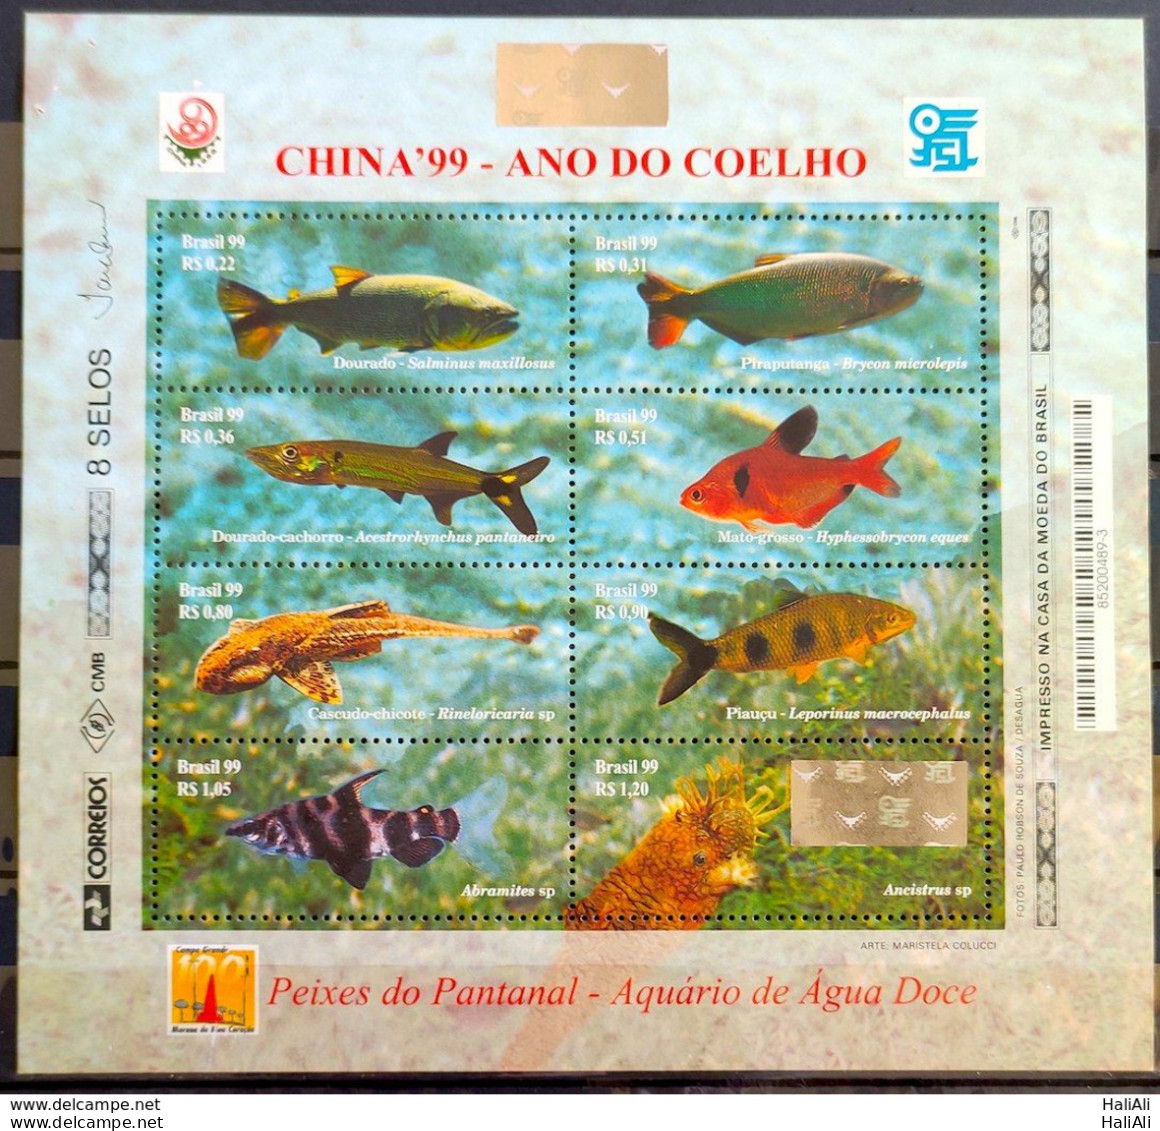 B 113 Brazil Stamp China Block Year Of The Rabbit Pisces Do Pantanal 1999 Clip Holes 2, Upper Left - Unused Stamps